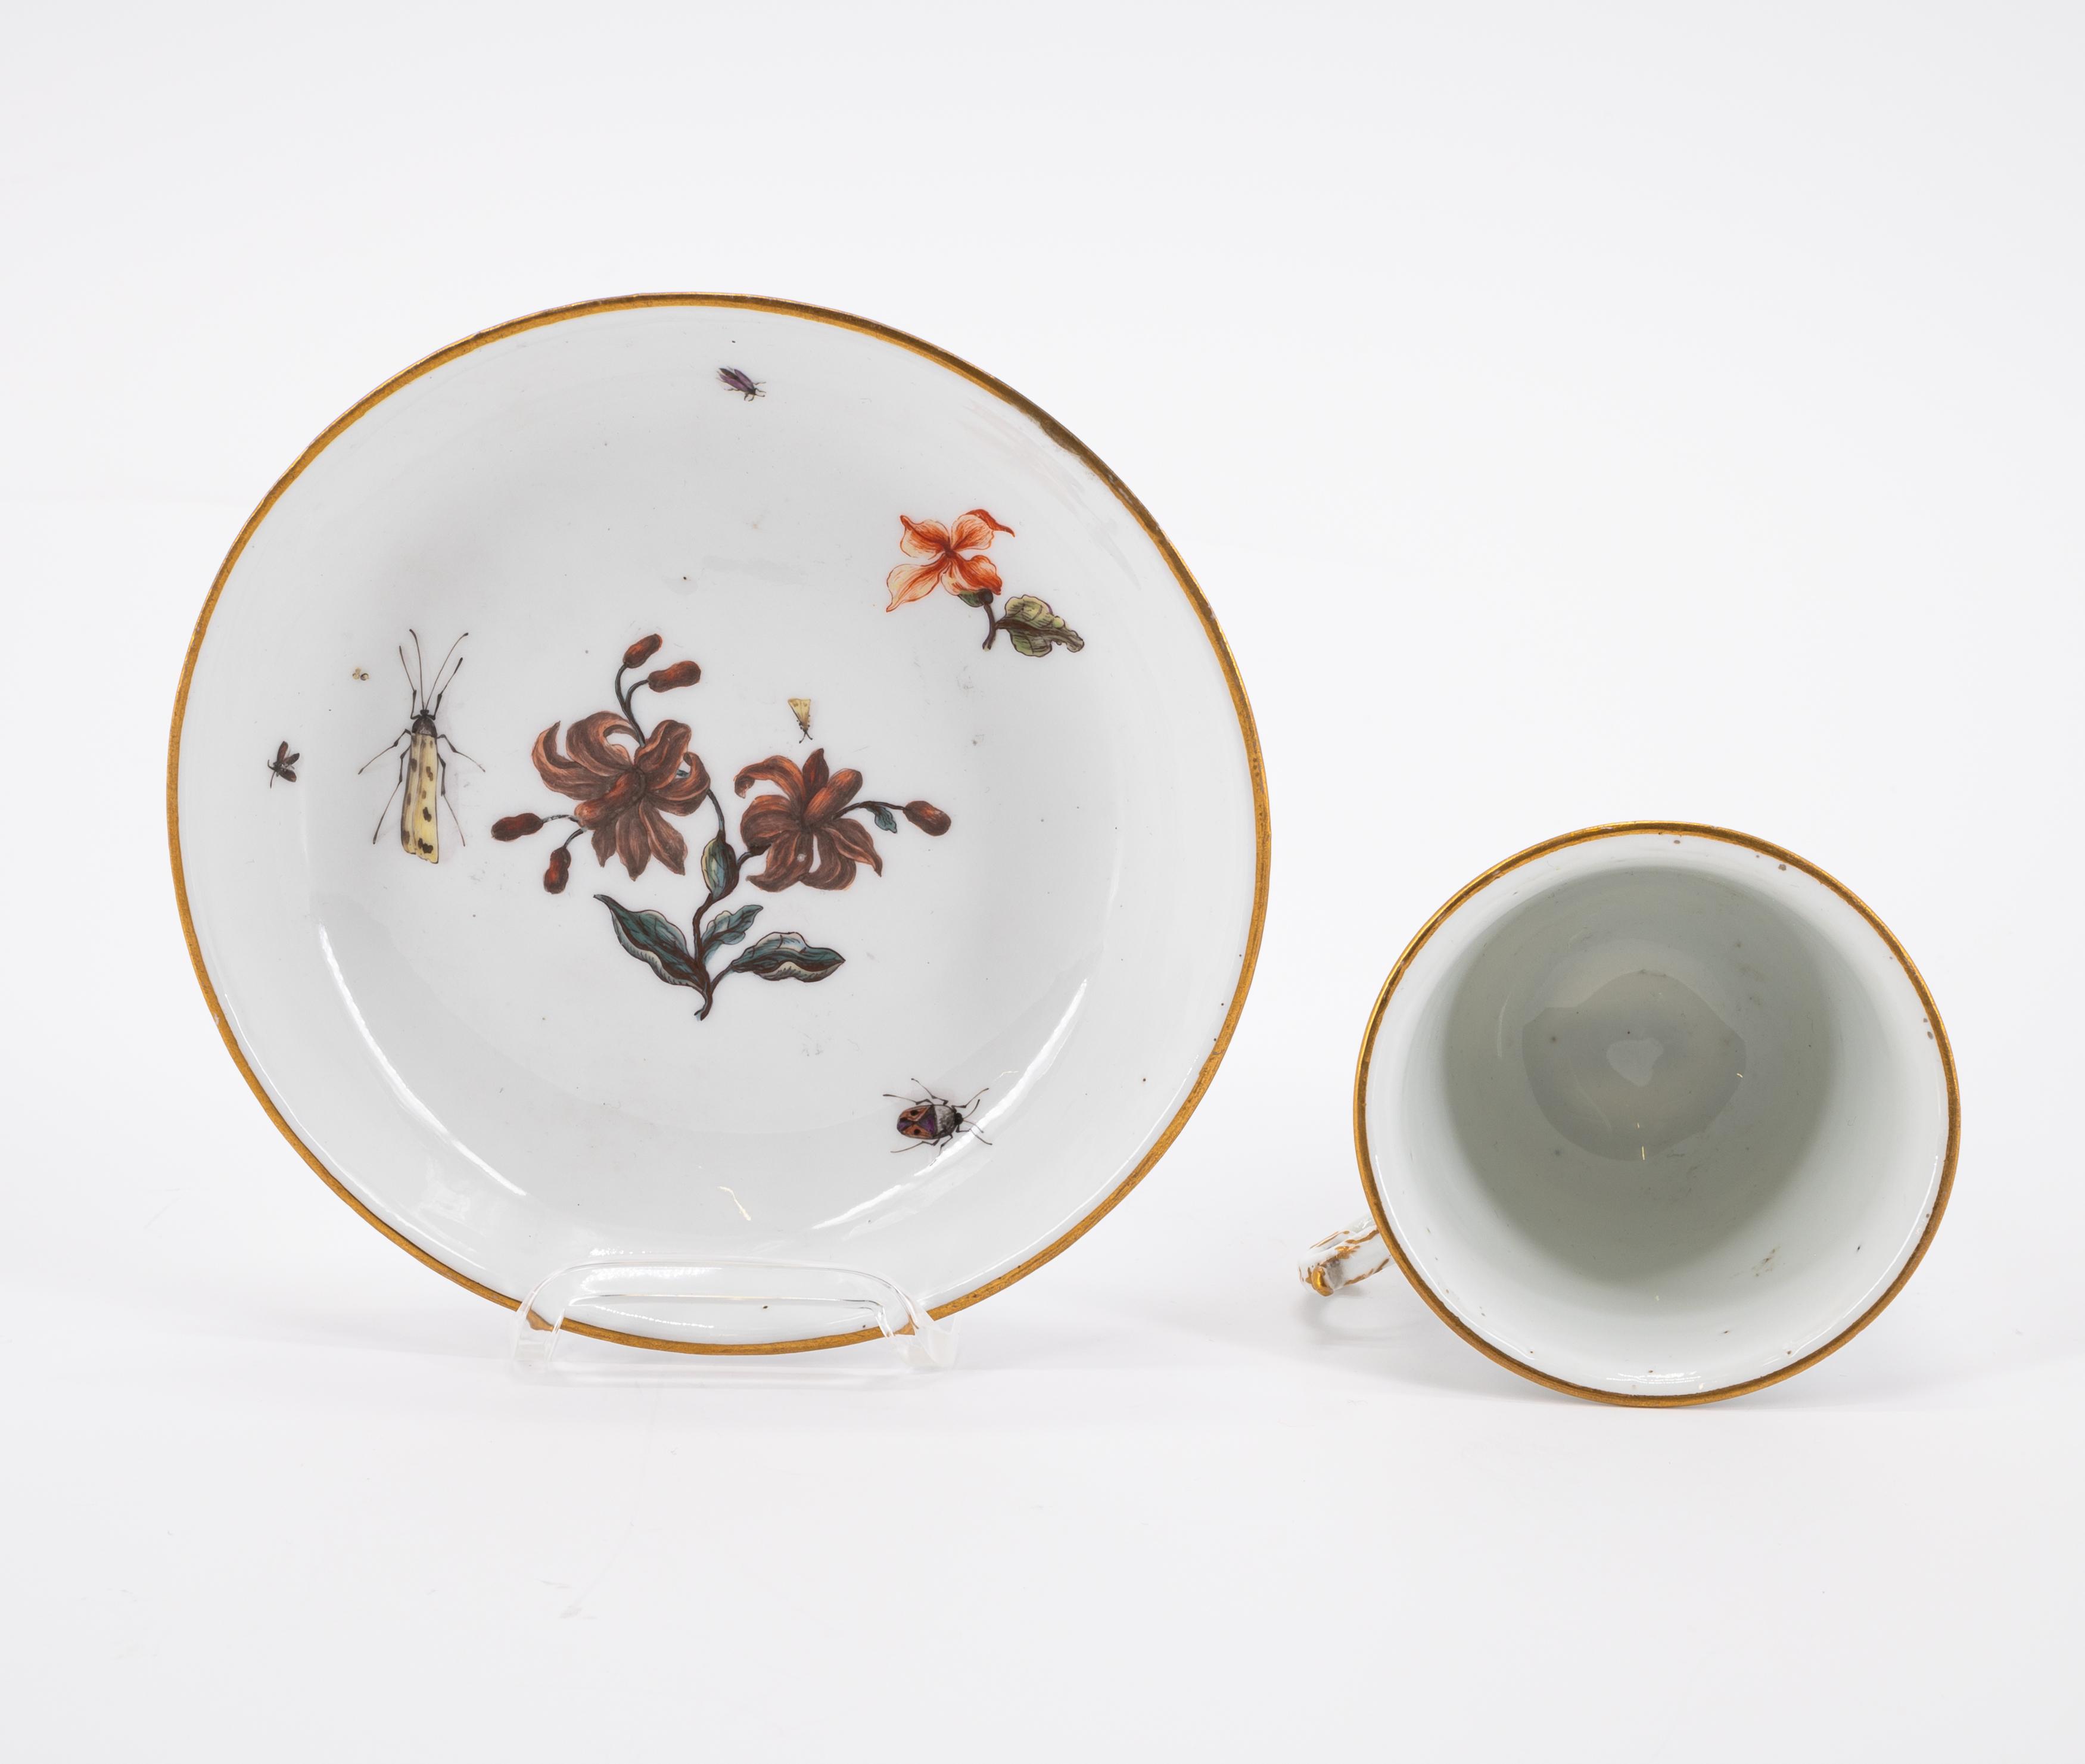 LARGE PORCELAIN LIDDED BOWL WITH FLOWER KNOB, SMALL TEA POT WITH WOODCUT FLOWERS AND CUP WITH SAUCER - Image 15 of 18